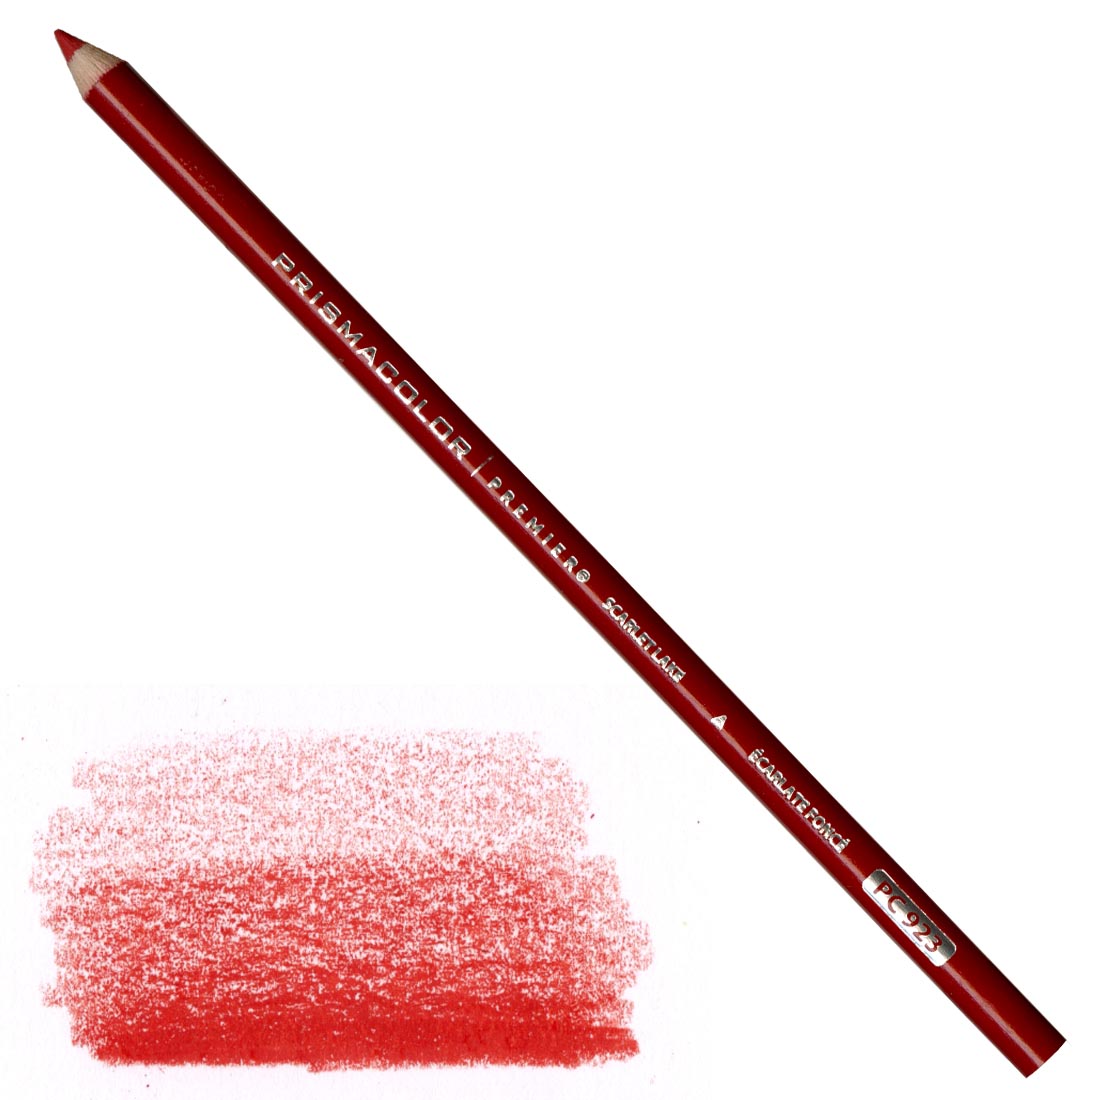 Scarlet Lake Prismacolor Premier Colored Pencil with a sample colored swatch